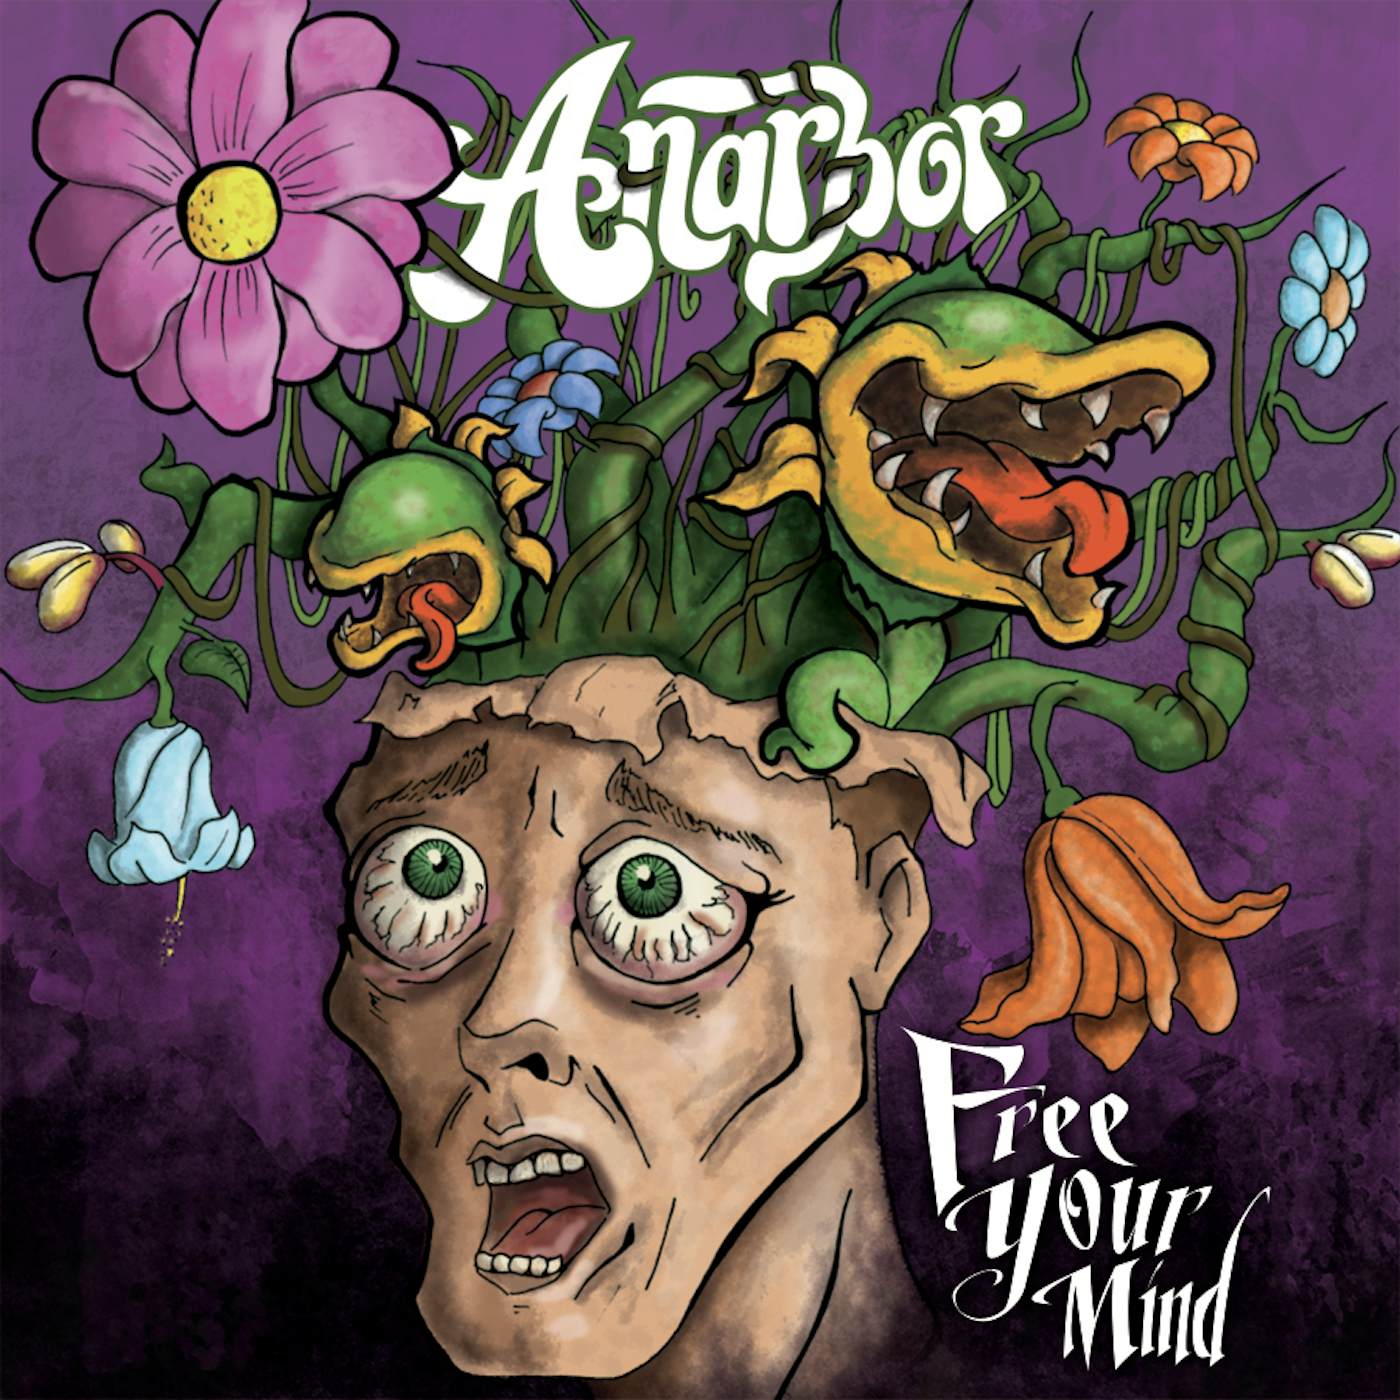 Anarbor FREE YOUR MIND CD